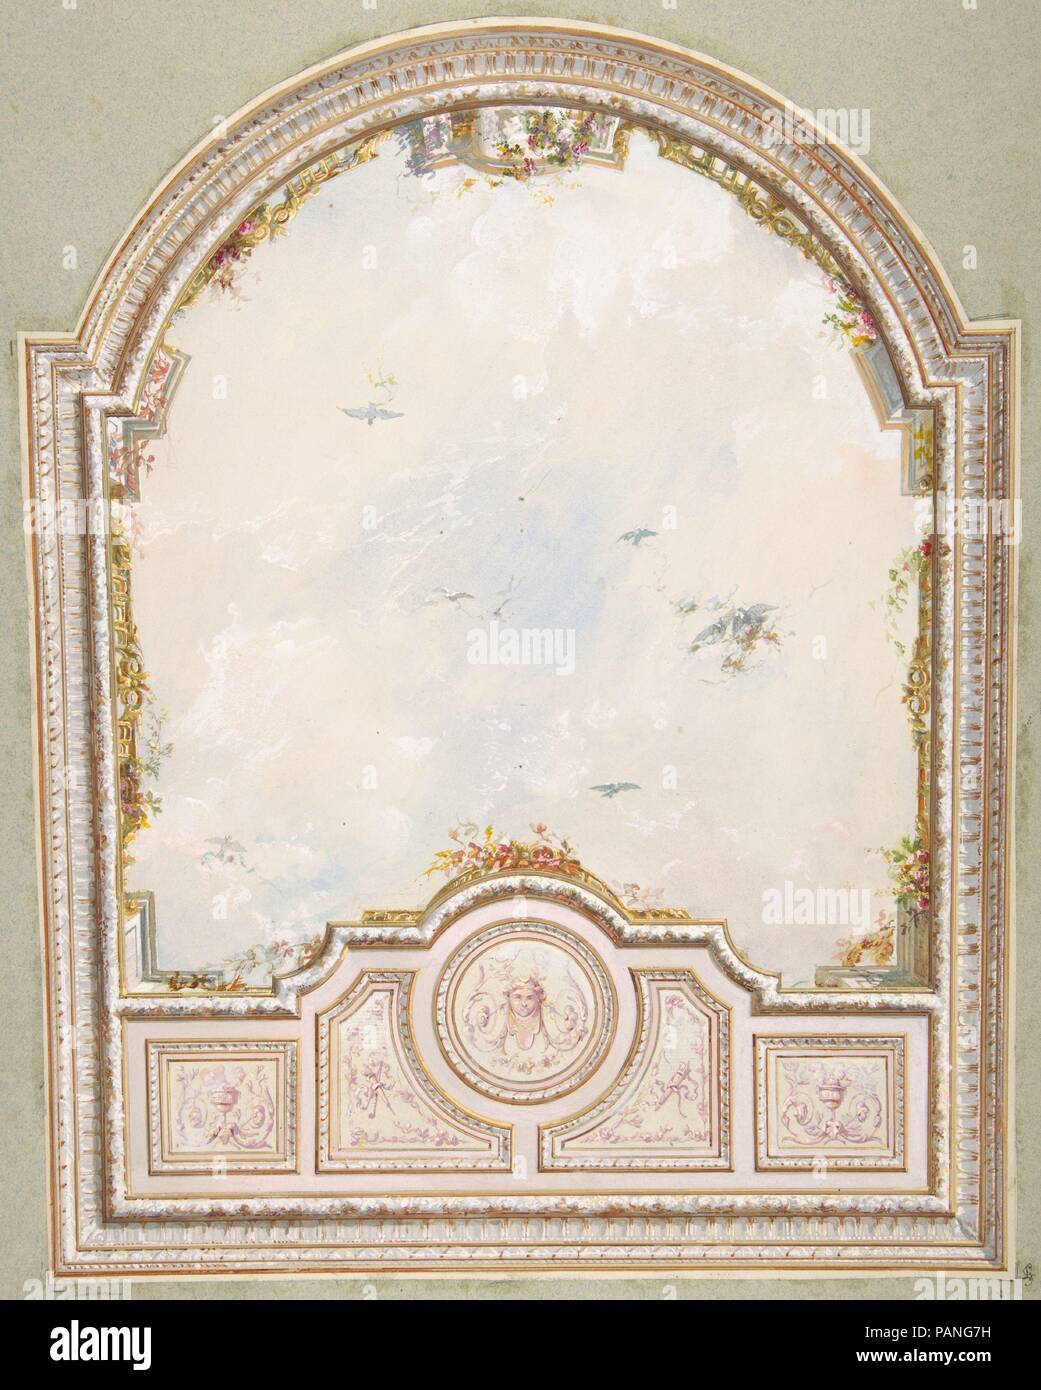 Deign for a ceiling a a trompe l'oeil sky. Artist: Jules-Edmond-Charles Lachaise (French, died 1897); Eugène-Pierre Gourdet (French, born Paris, 1820-1889). Dimensions: Overall: 19 3/4 x 13 1/2 in. (50.1 x 34.3 cm). Date: second half 19th century. Museum: Metropolitan Museum of Art, New York, USA. Stock Photo